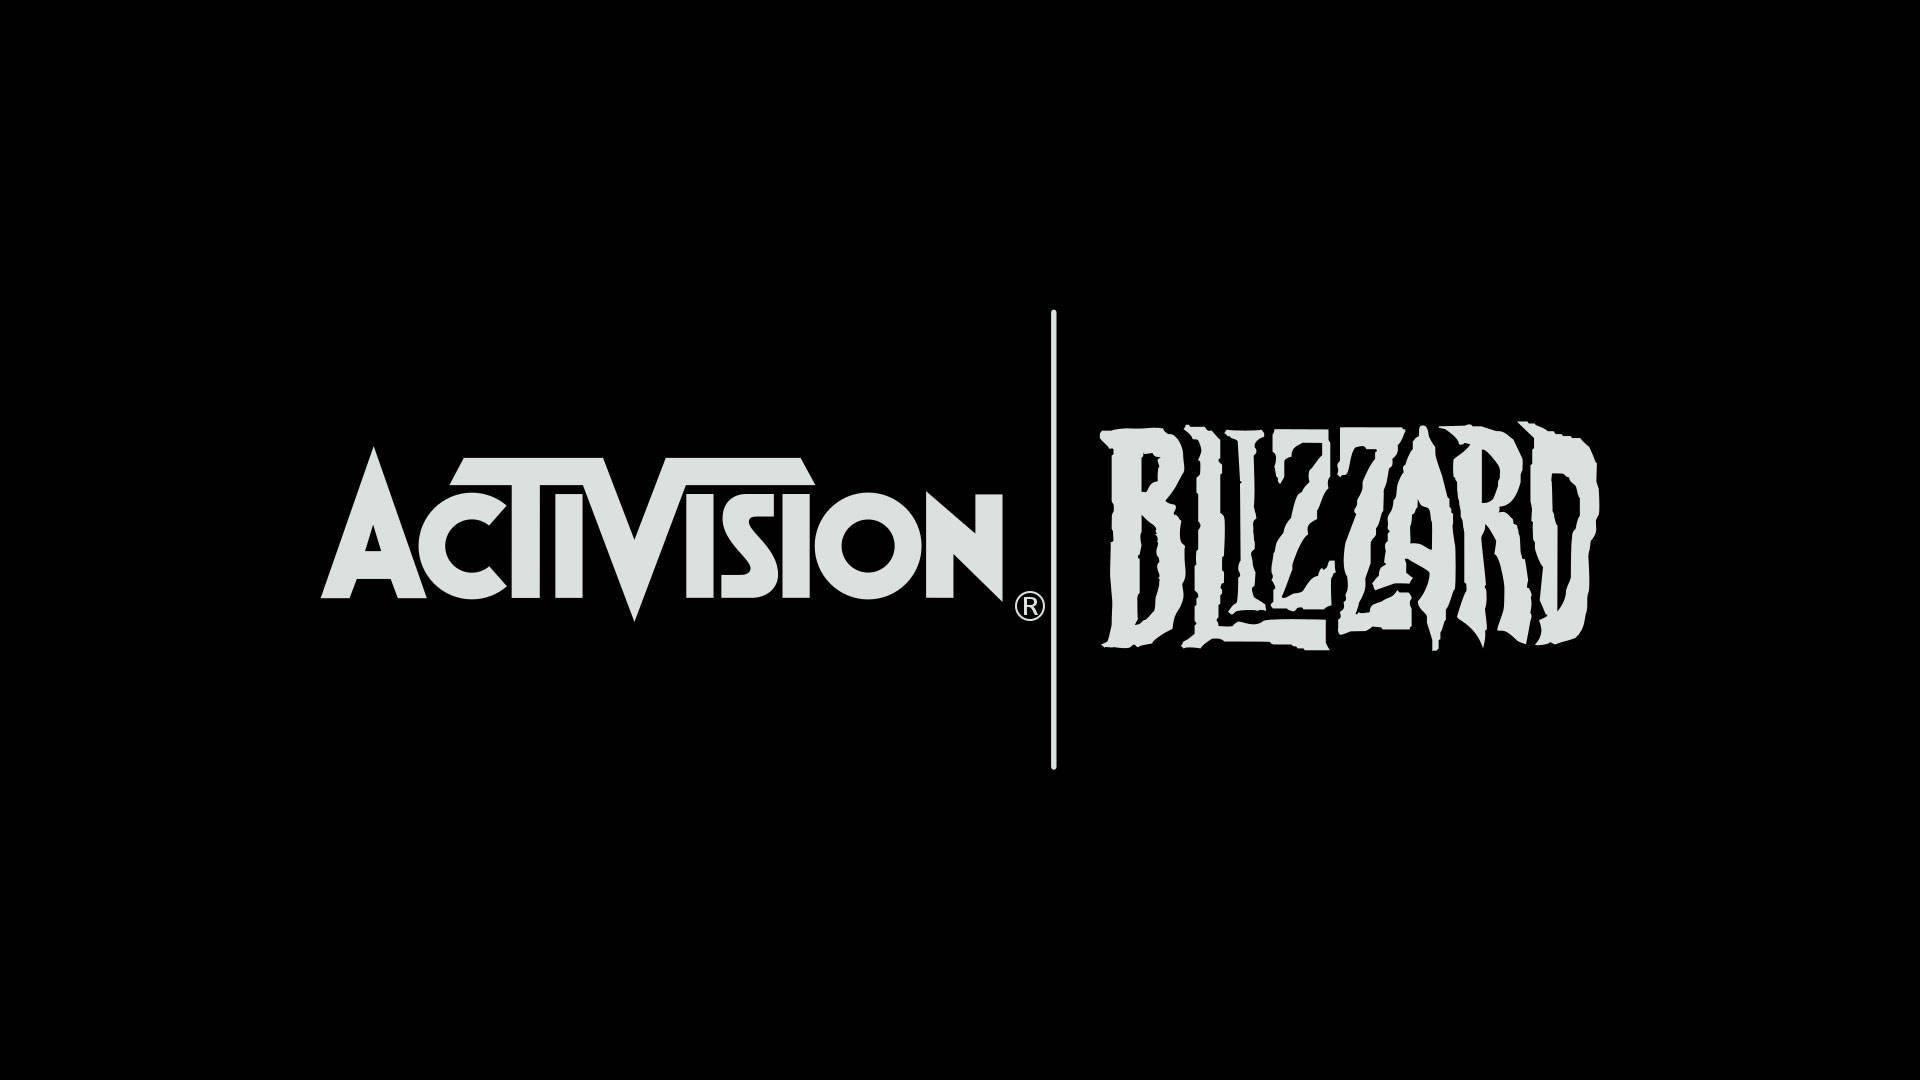 Ex-Blizzard Boss Says He is “Extremely Sorry” and “Believes” Sexual Harassment Allegations